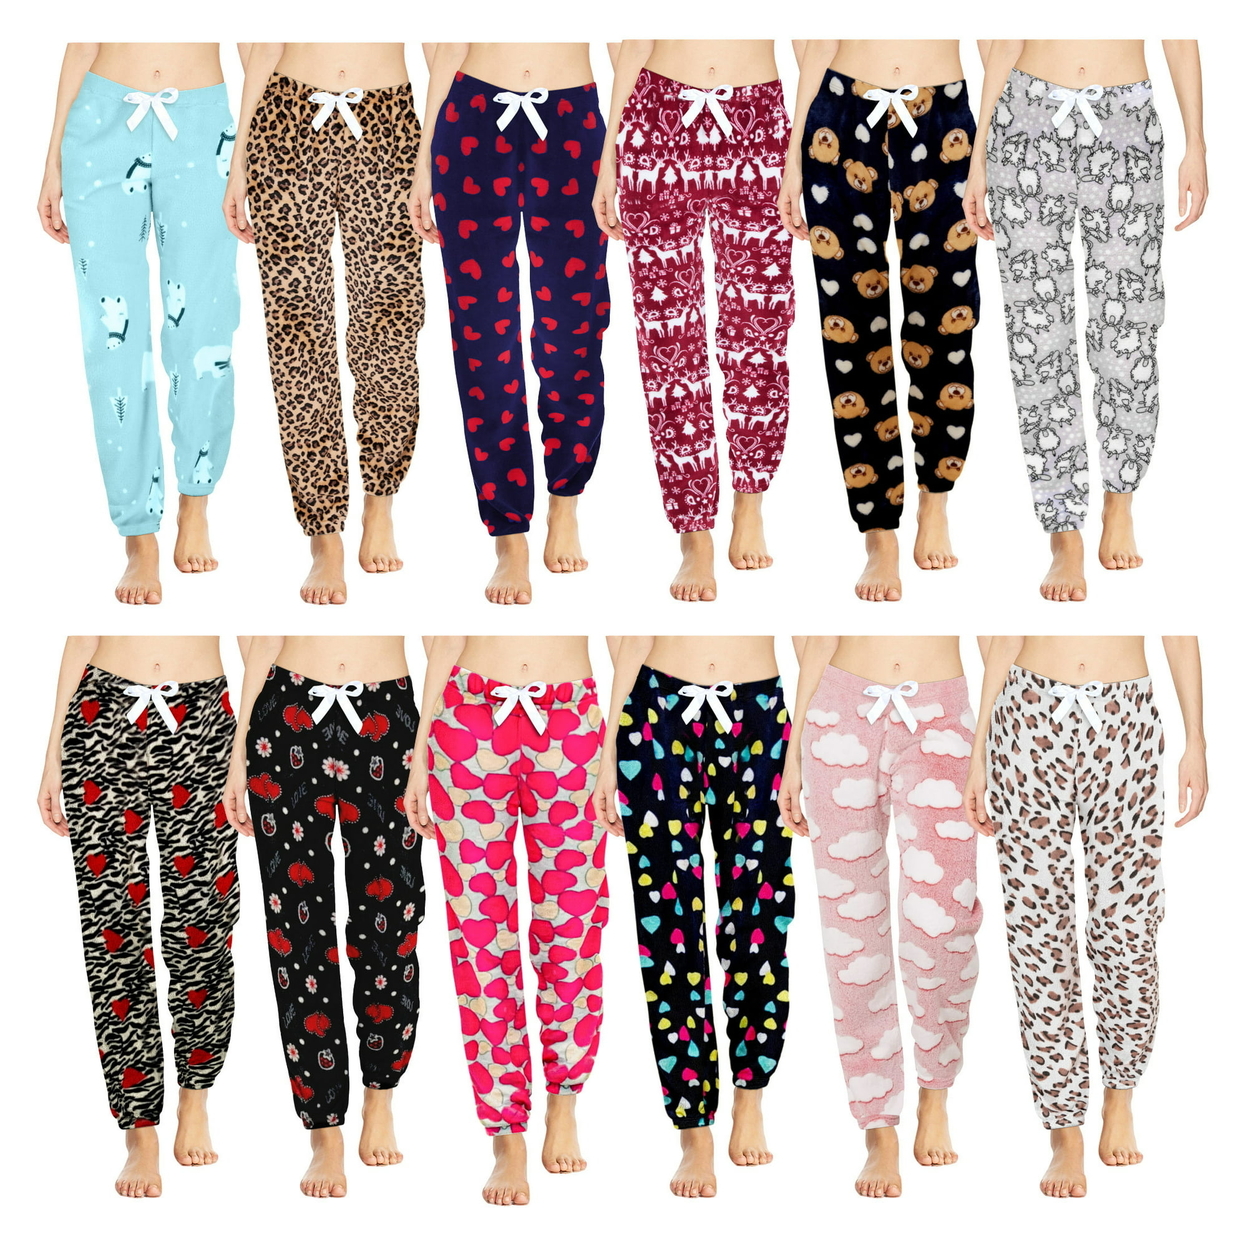 3-Pack: Women's Printed Ultra-Soft Comfy Stretch Micro-Fleece Pajama Lounge Pants - Small, Love